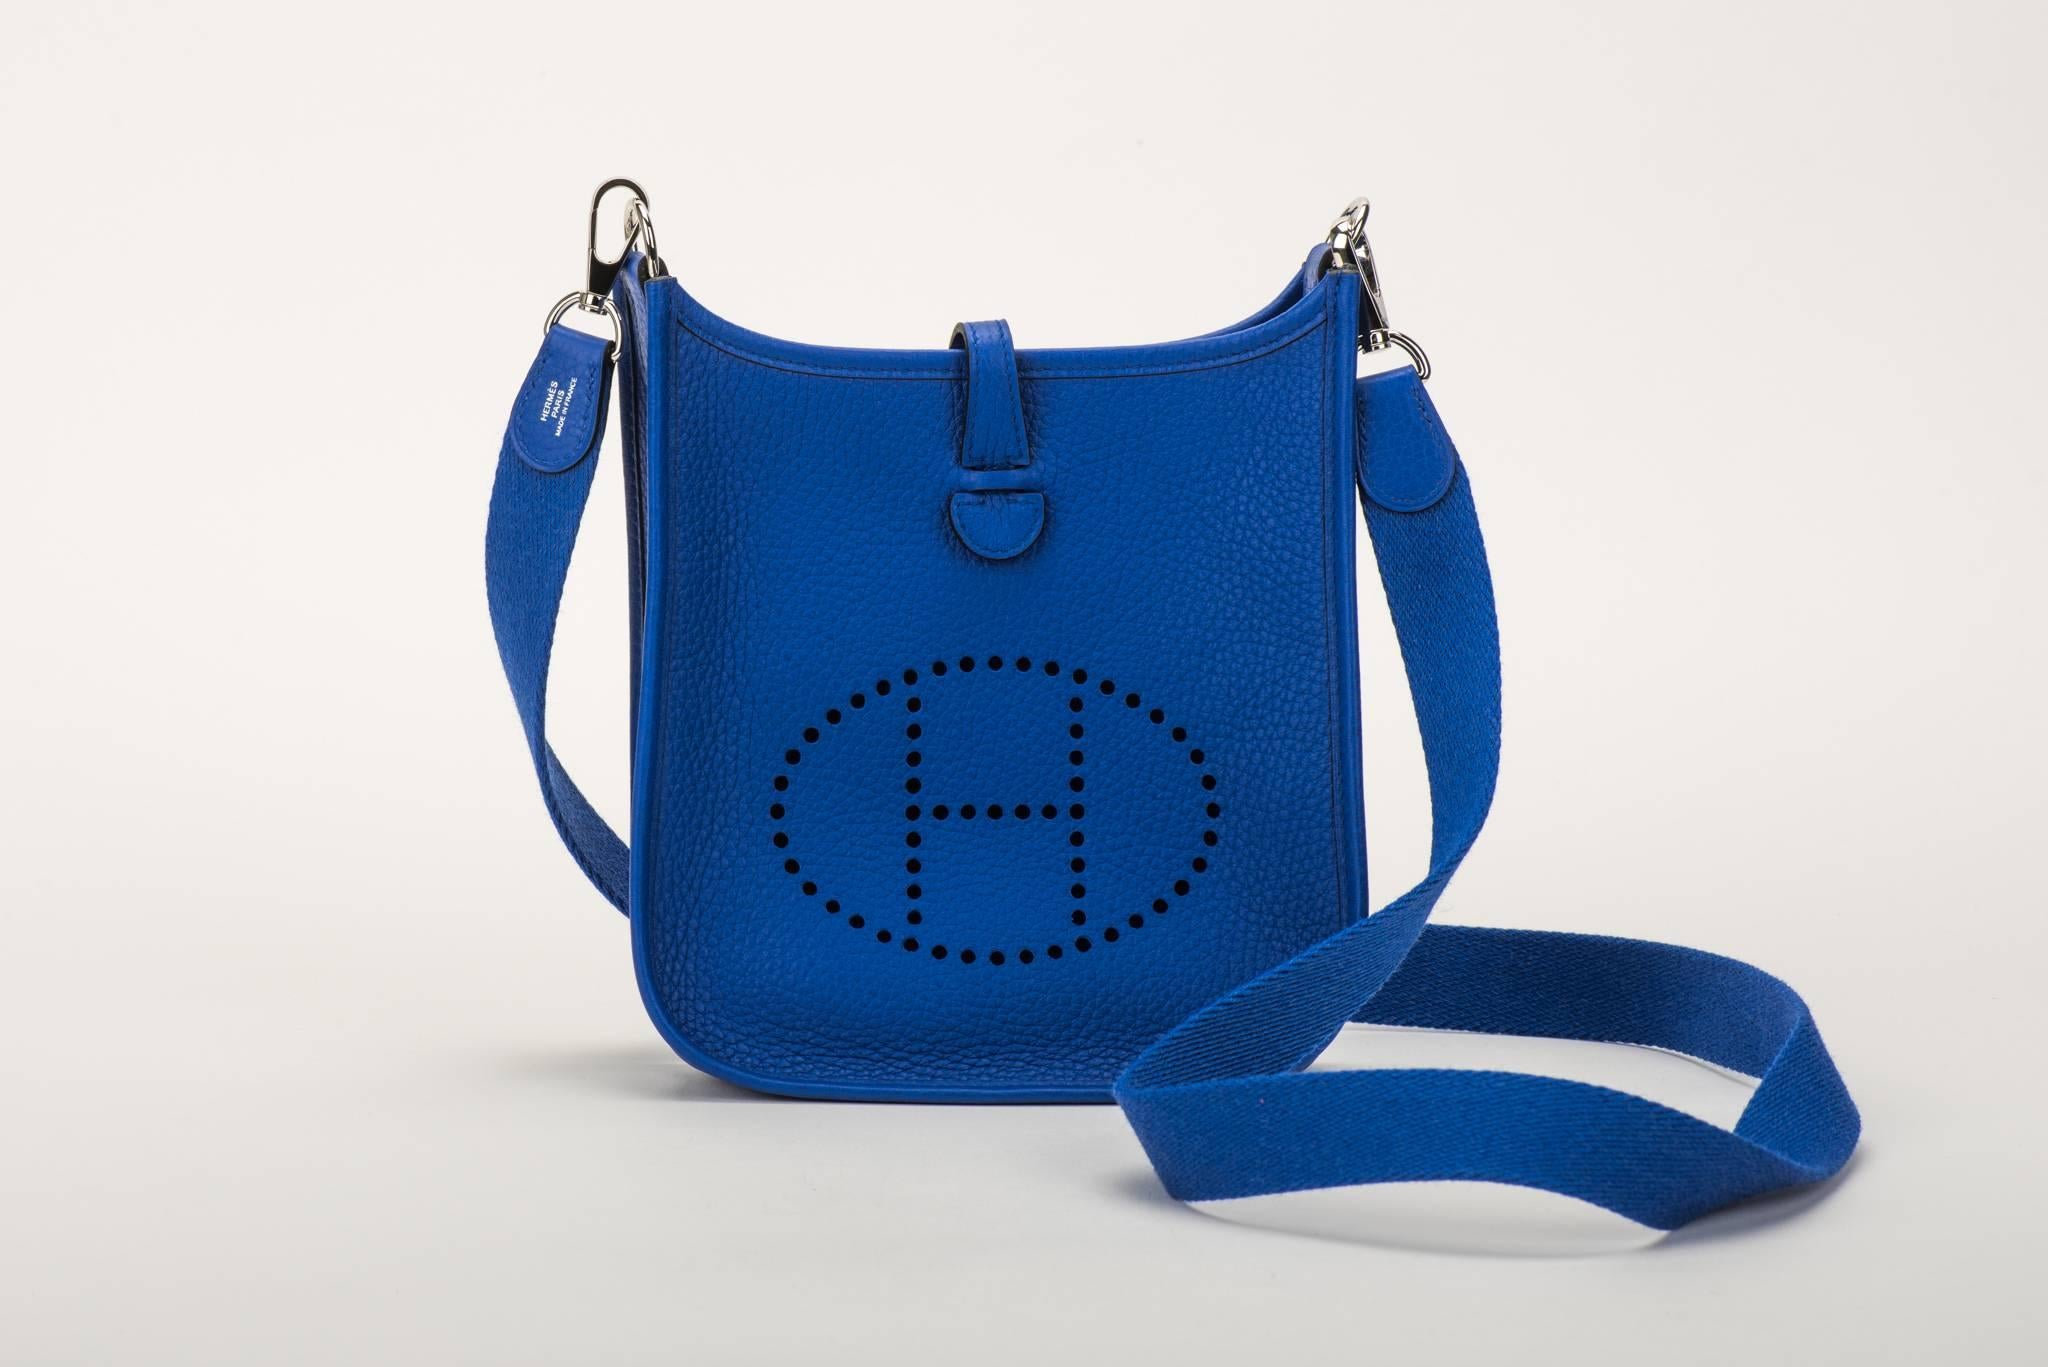 Hermès mini Evelyne shoulder bag in electric blue clemence leather with palladium hardware. Never used. Dated 